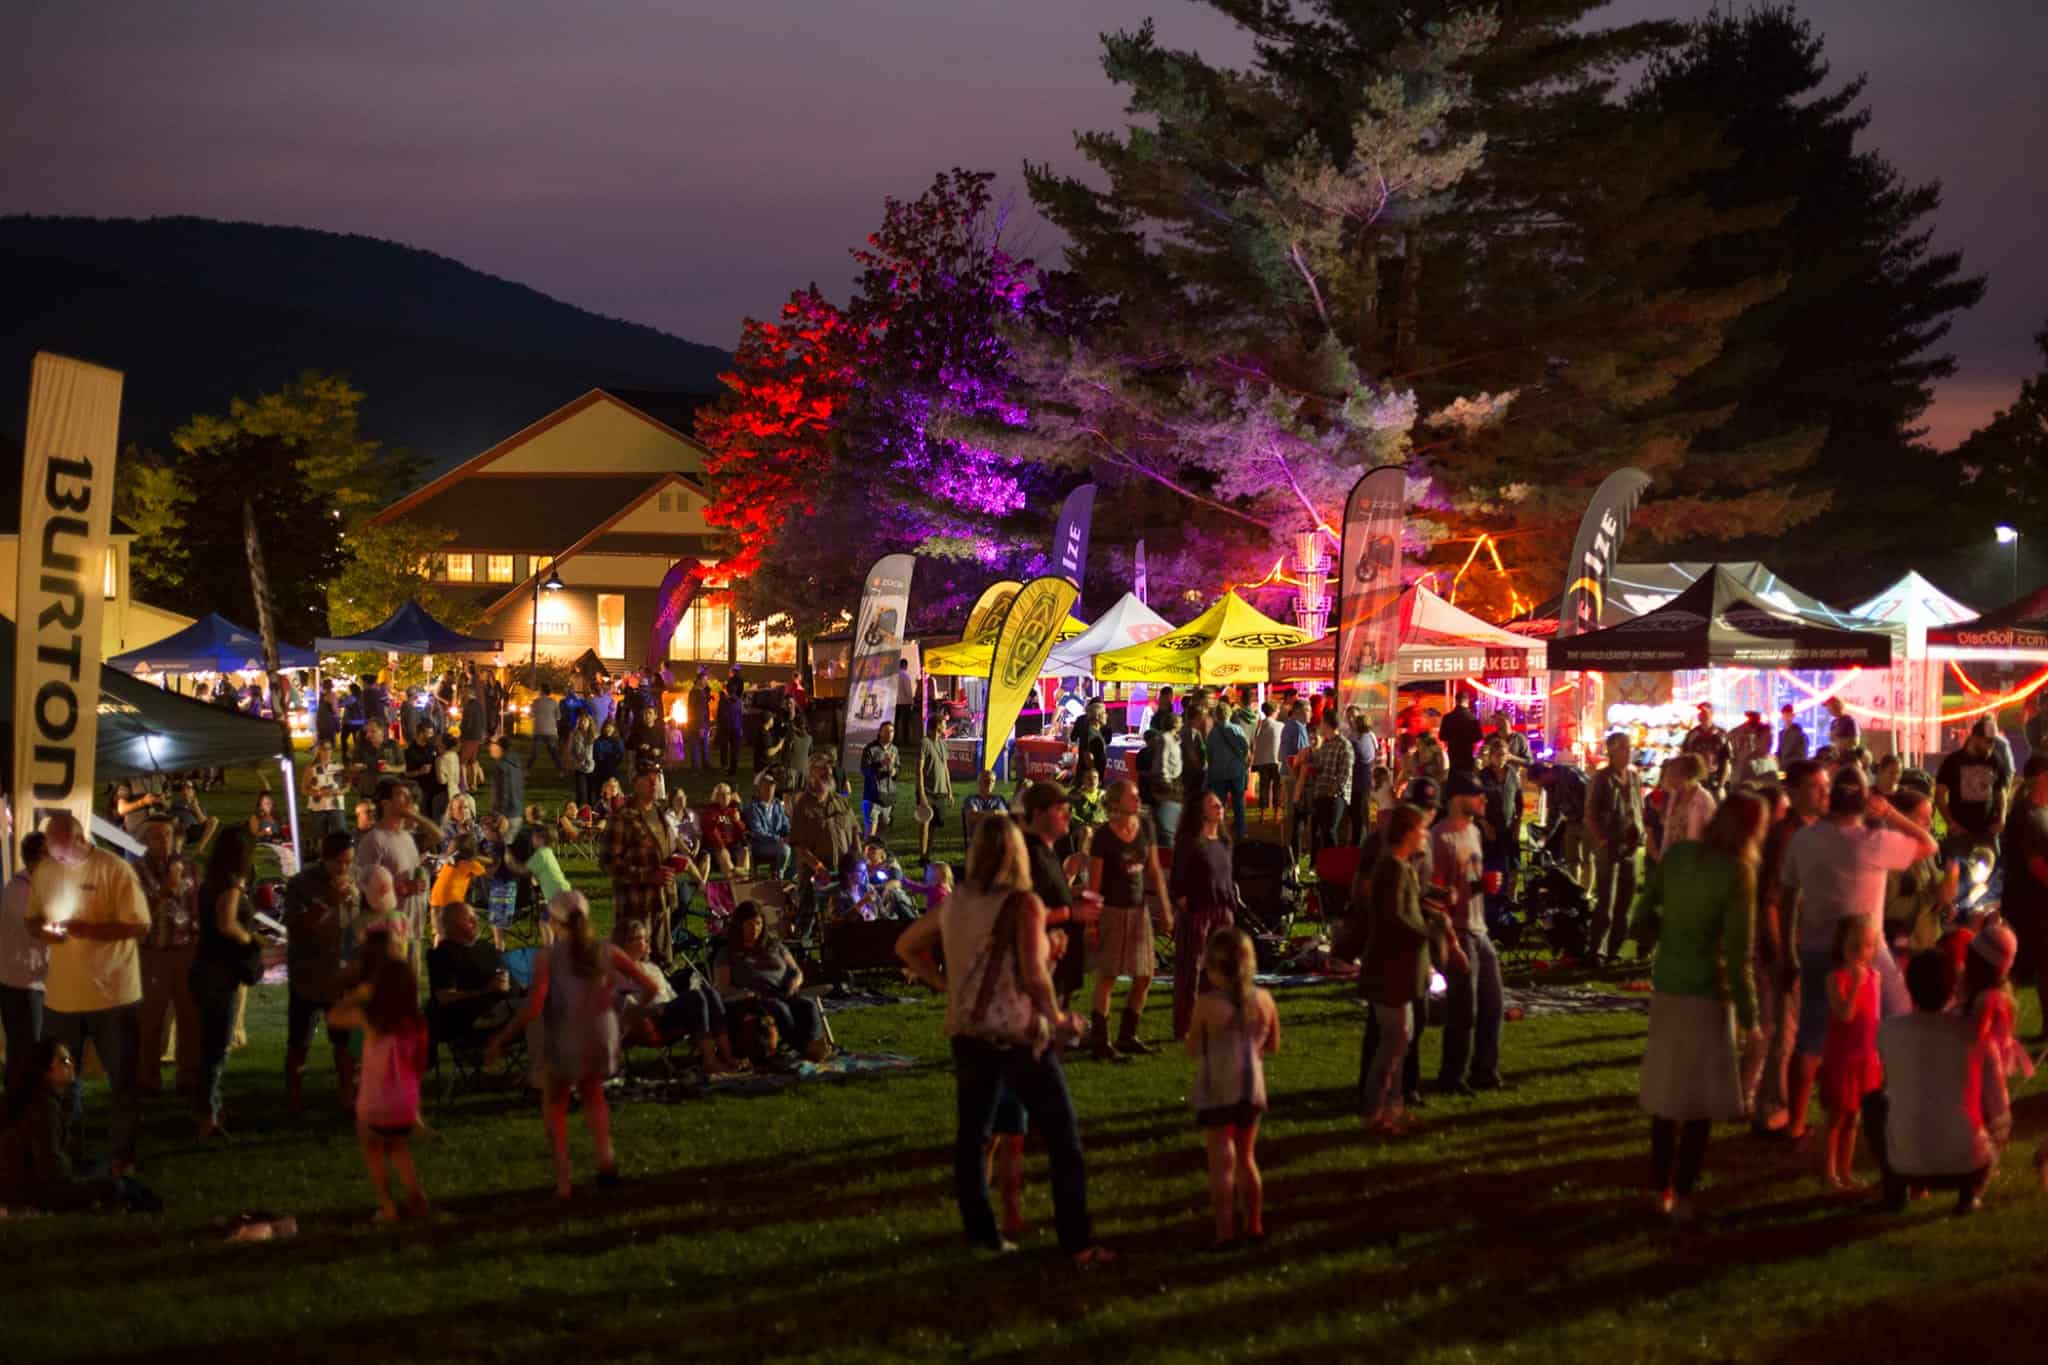 Smugglers Notch FallFest at Night Vendors and Lights